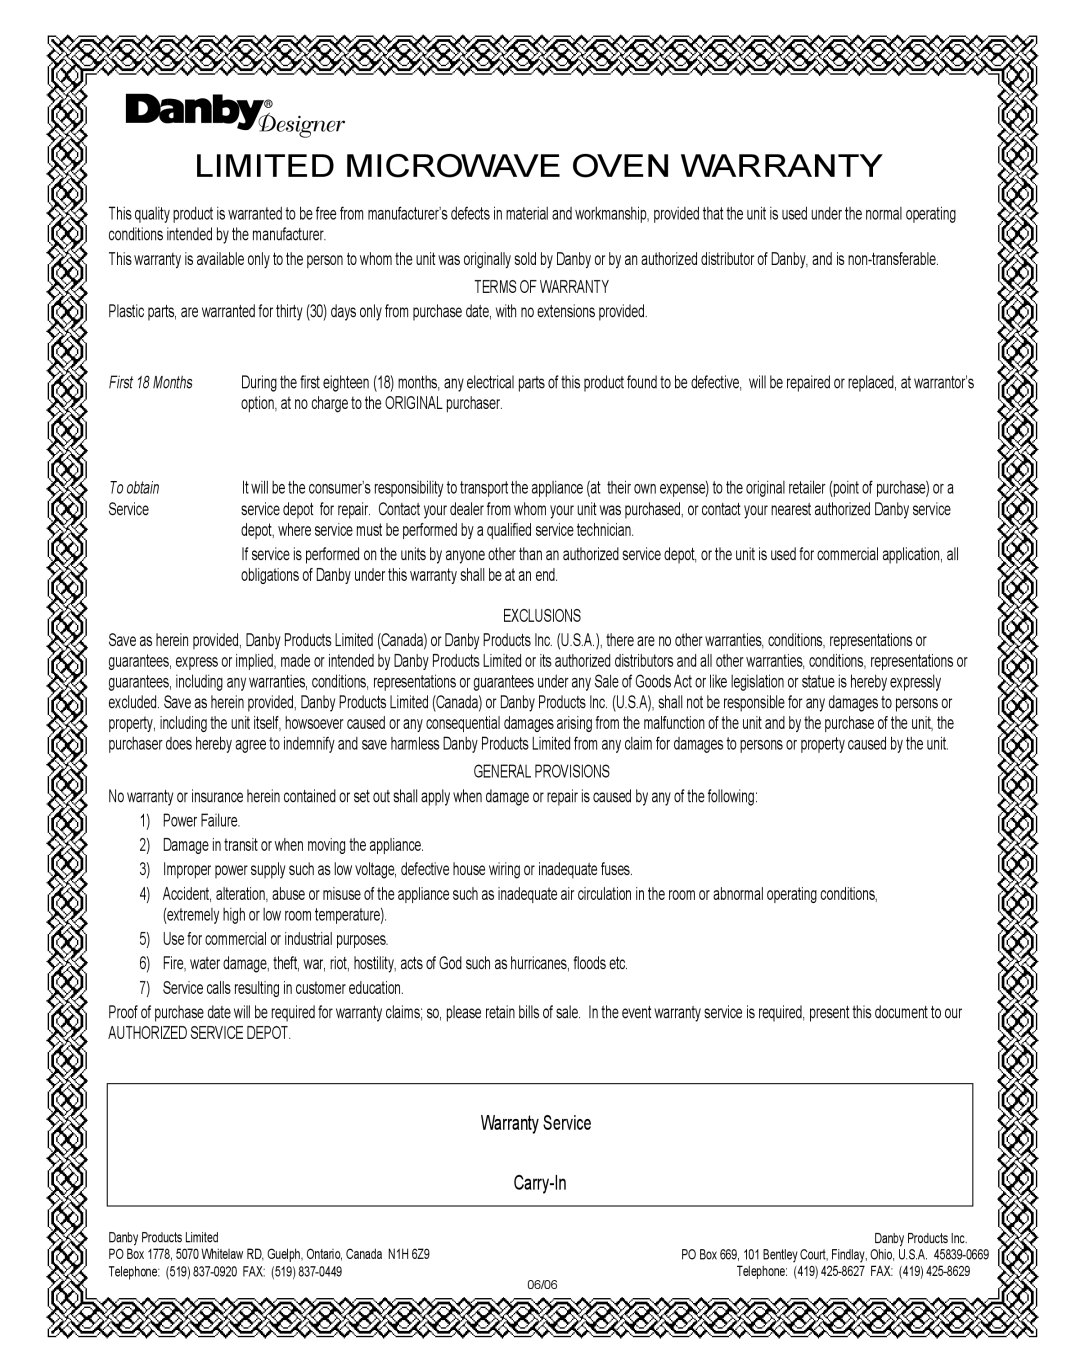 Danby DMW1148SS owner manual Limited Microwave Oven Warranty, Warranty Service, Carry-In, First 18 Months, To obtain 